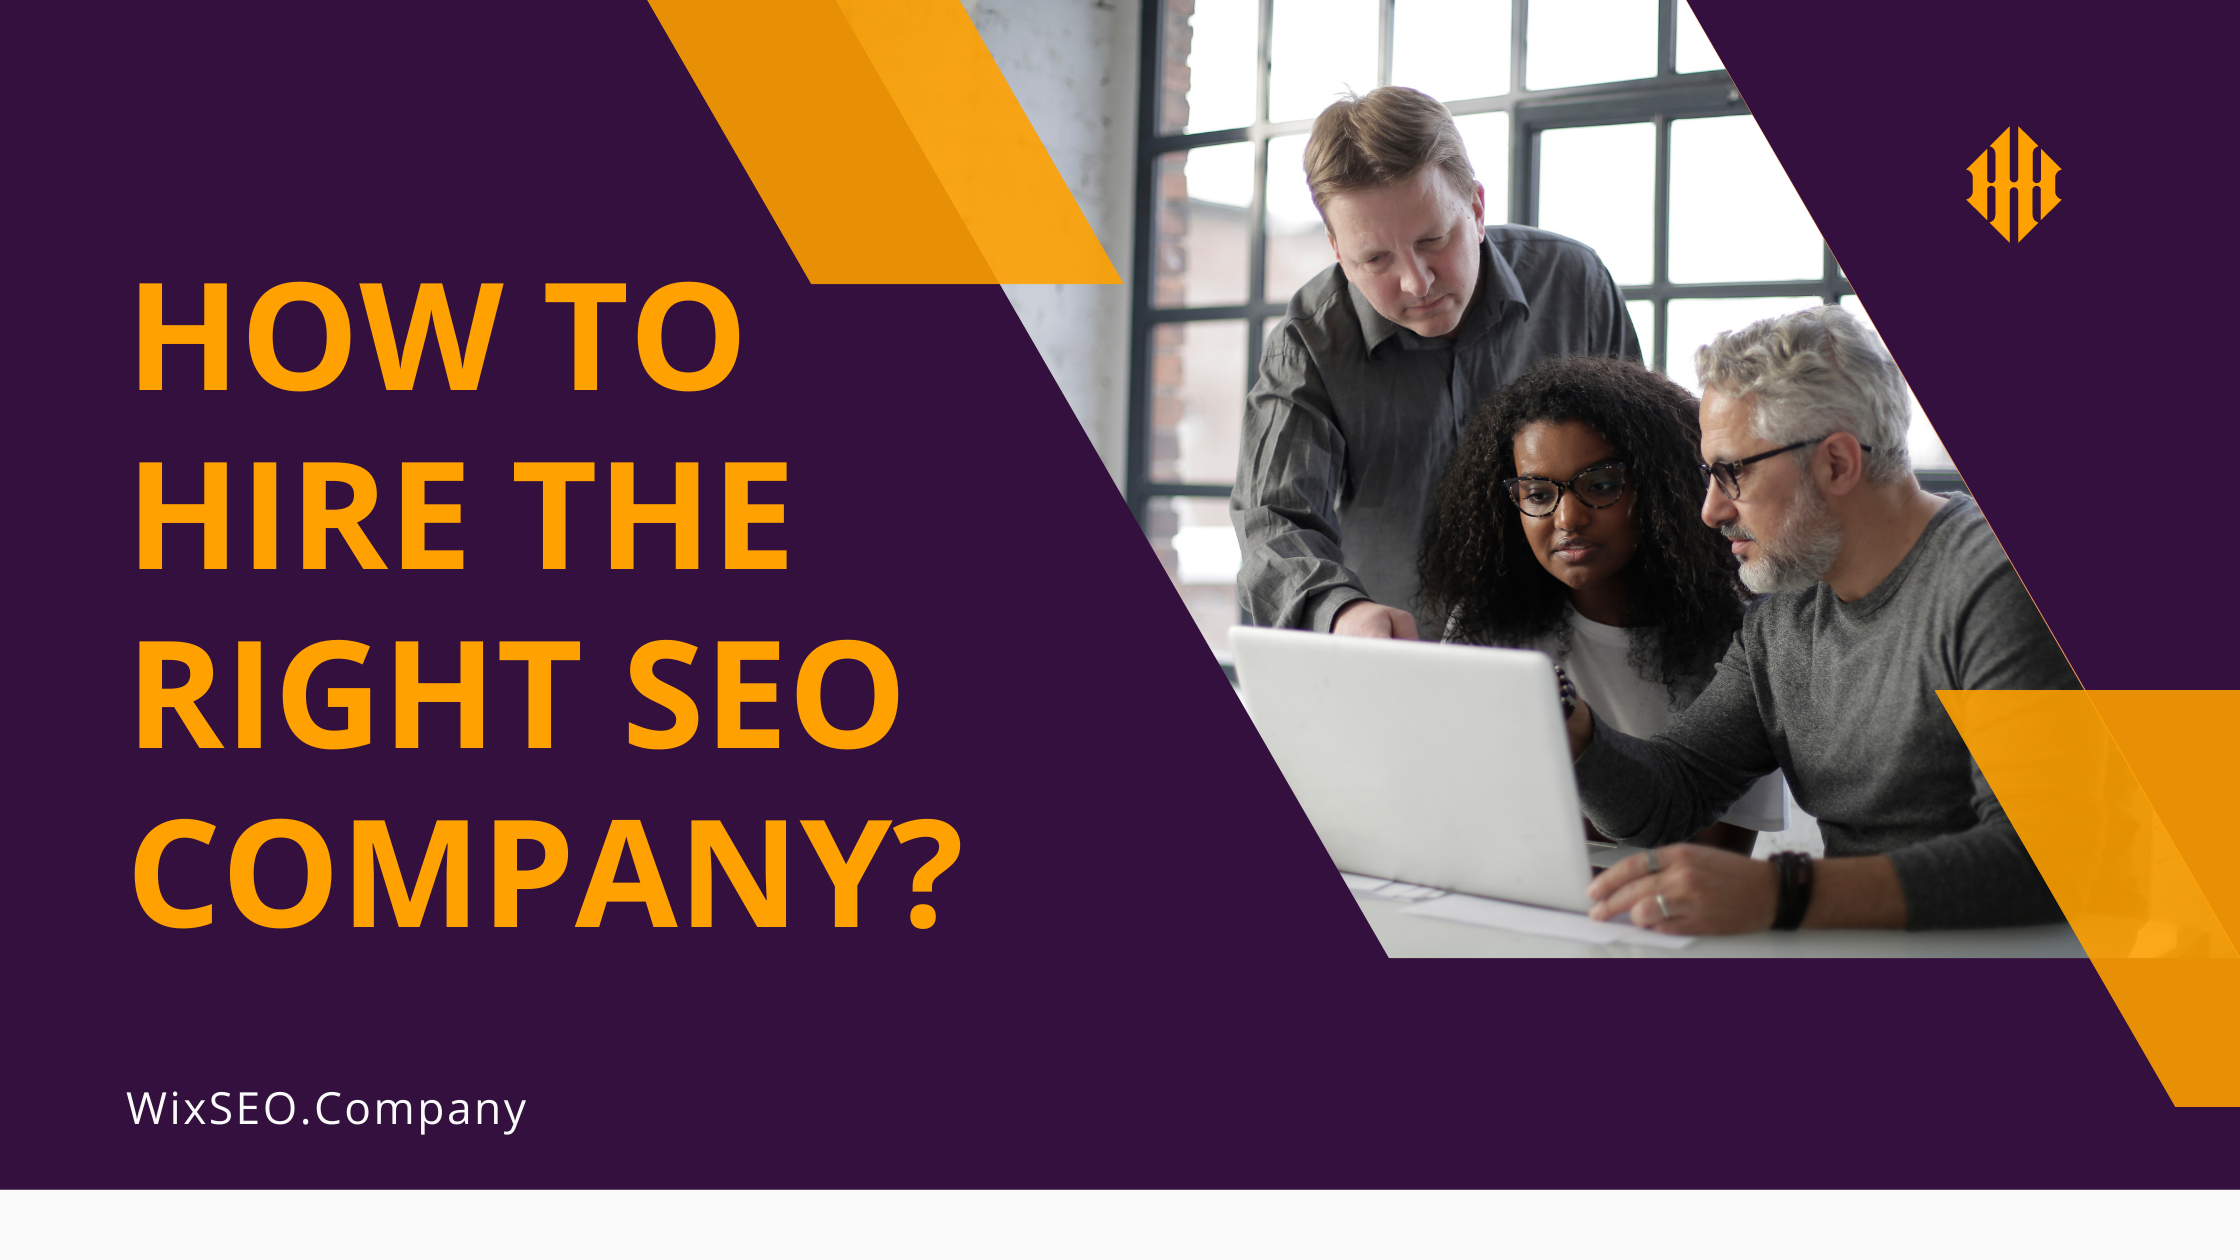 How to hire the right SEO Company?